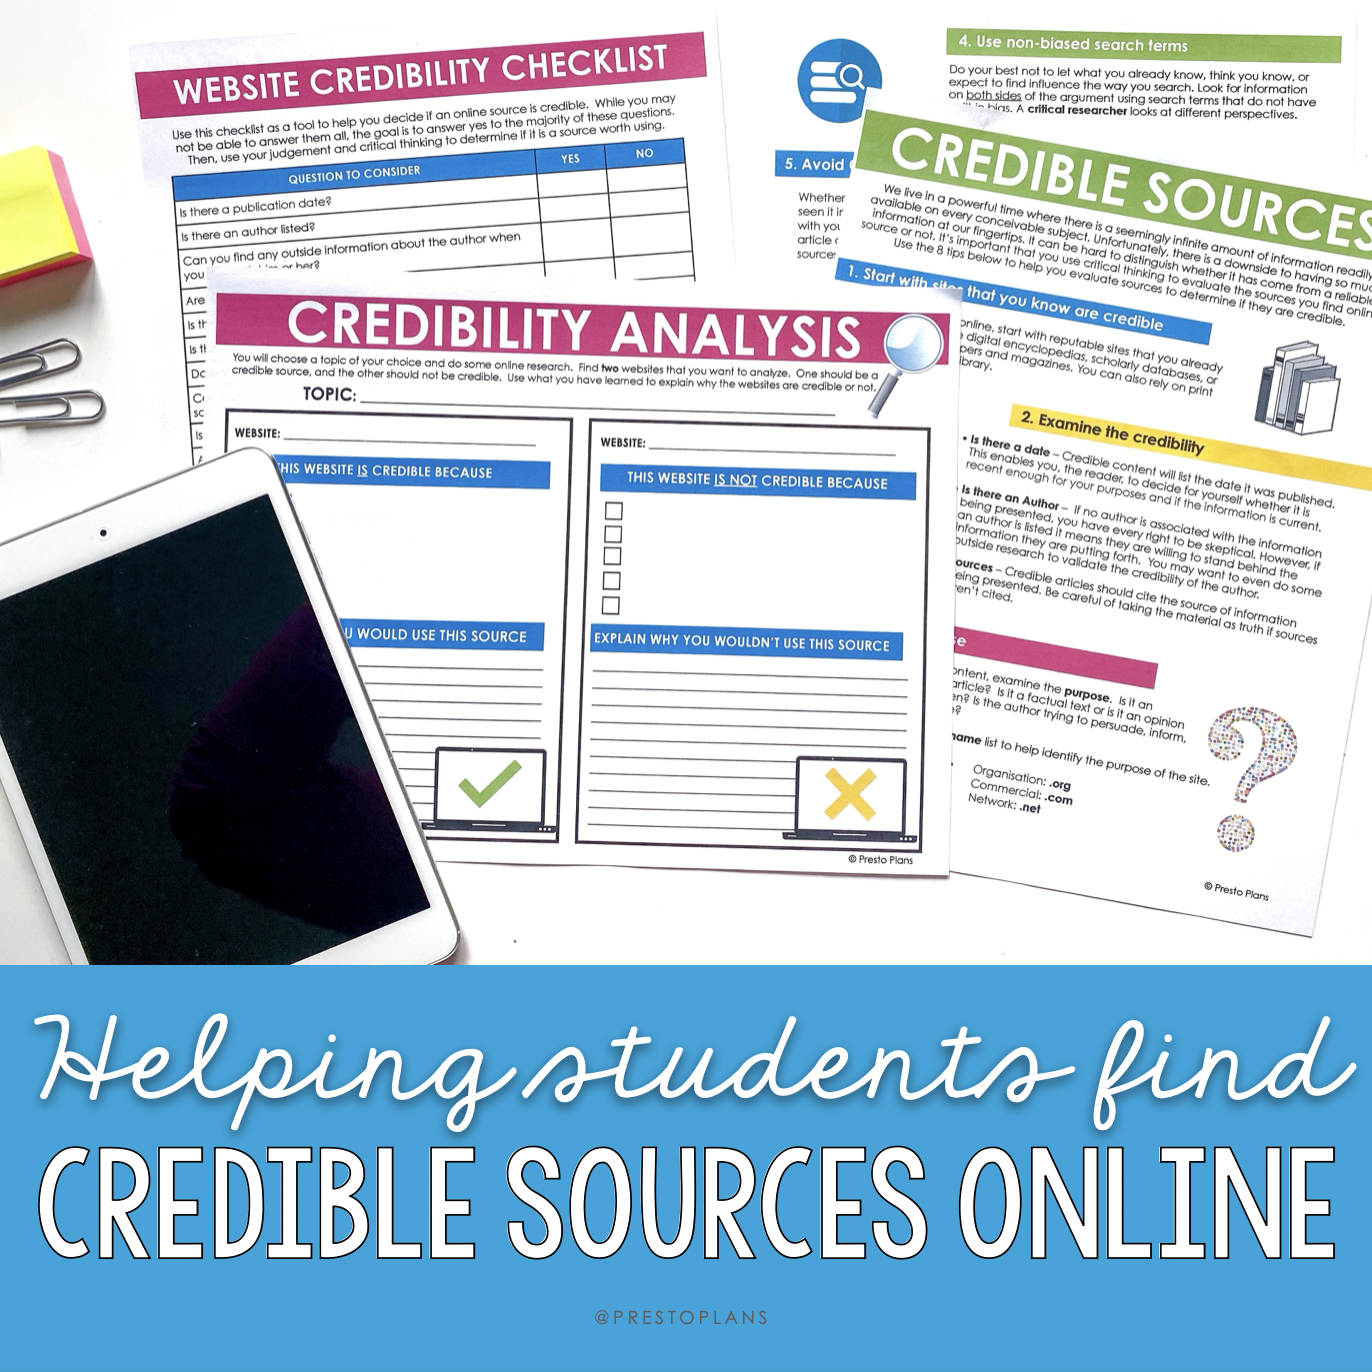 Helping students find credible sources online is an essential ELA skill that transfers easily into other subjects.